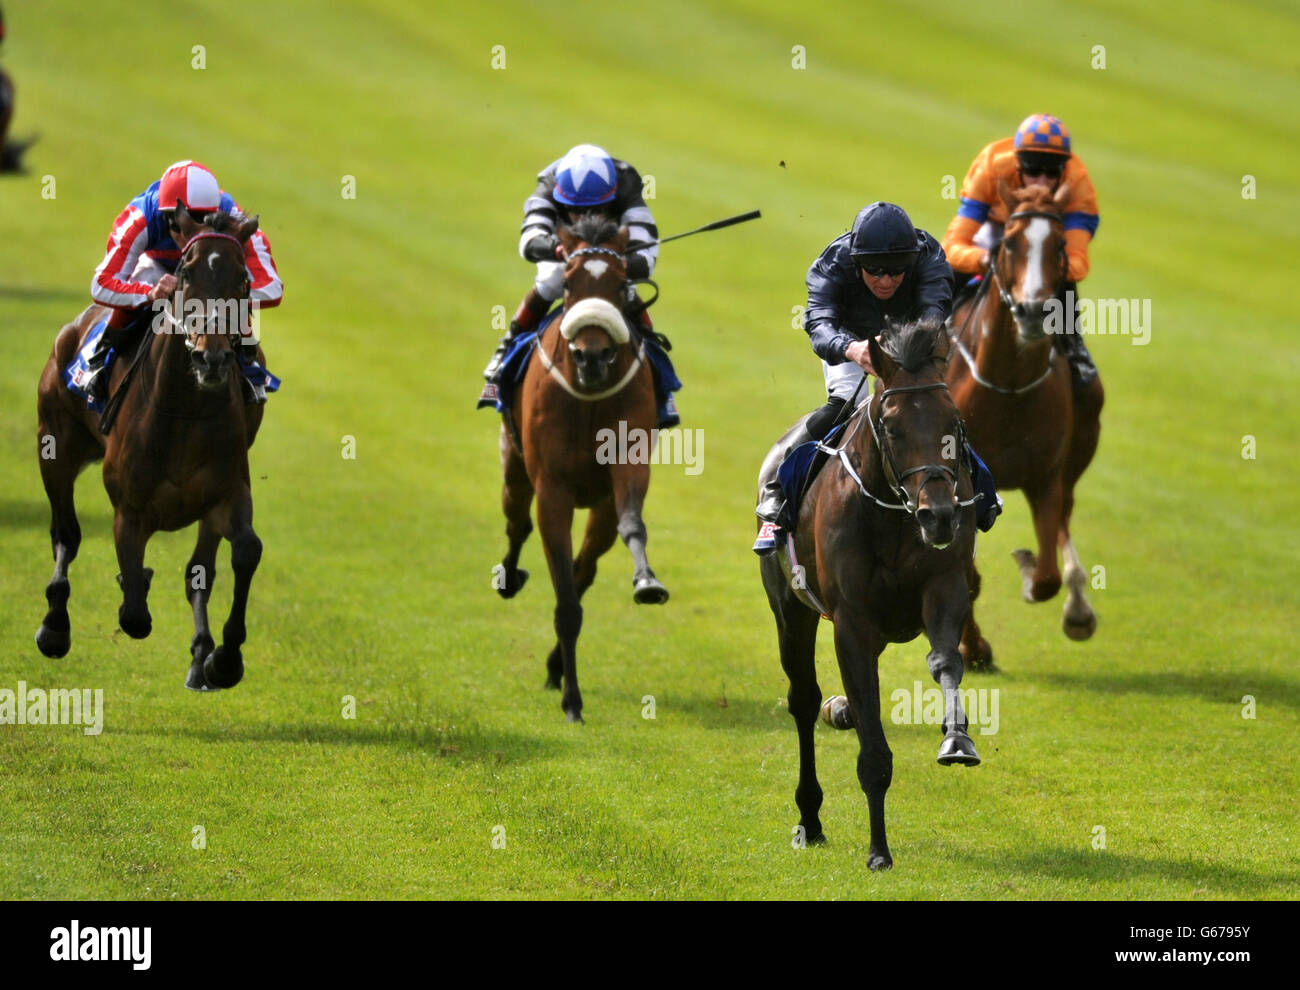 Ernest Hemingway ridden by Seamie Heffernan (second right) wins The At The Races Curragh Cup during Oxigen Environmental Pretty Polly Stakes Day at Curragh Racecourse in Co. Kildare, Ireland. Stock Photo